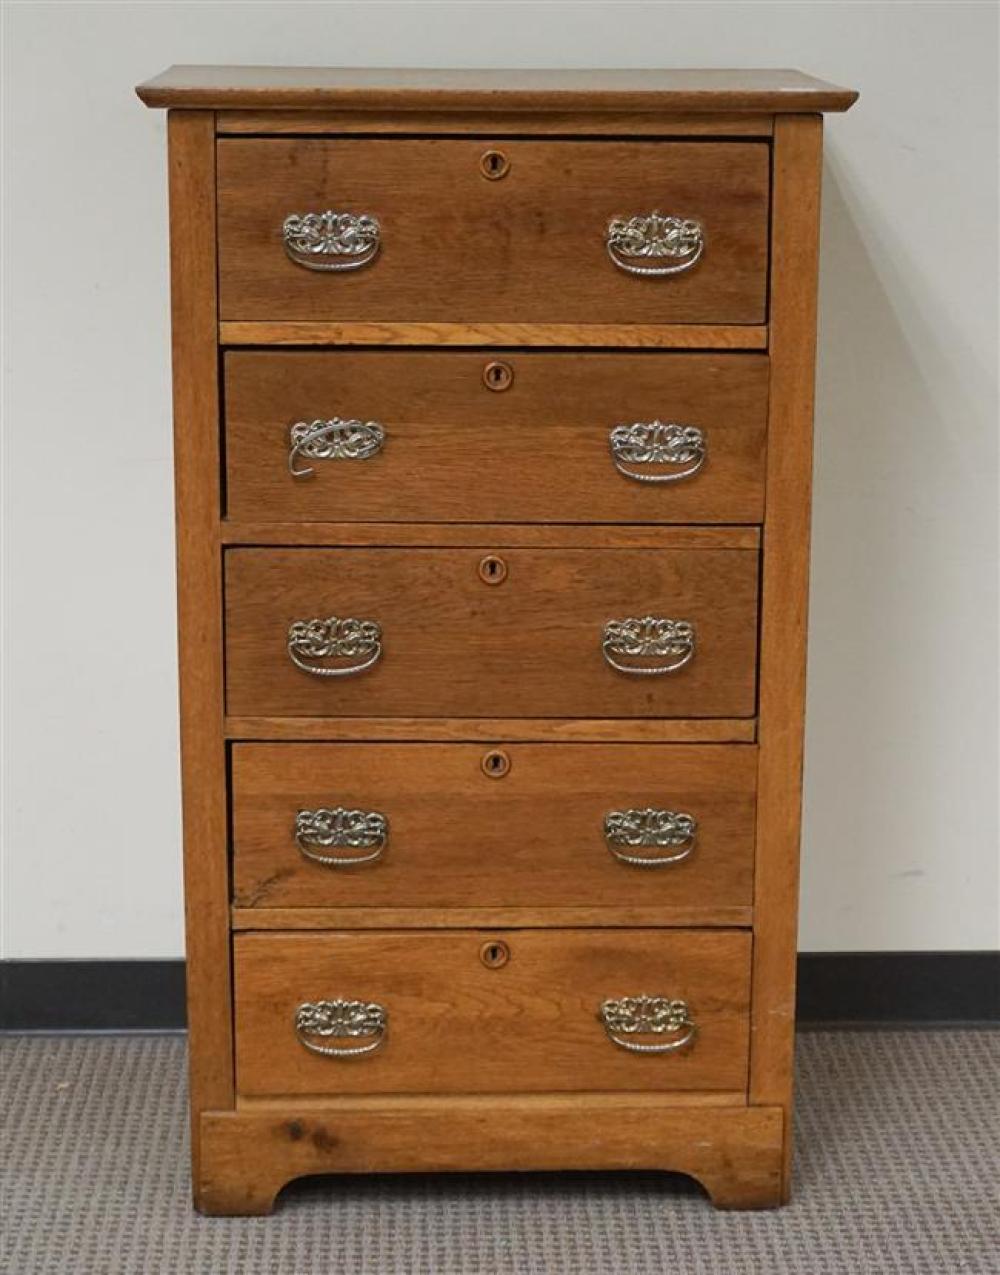 OAK FIVE-DRAWER CHEST, H: 45-3/4 IN,